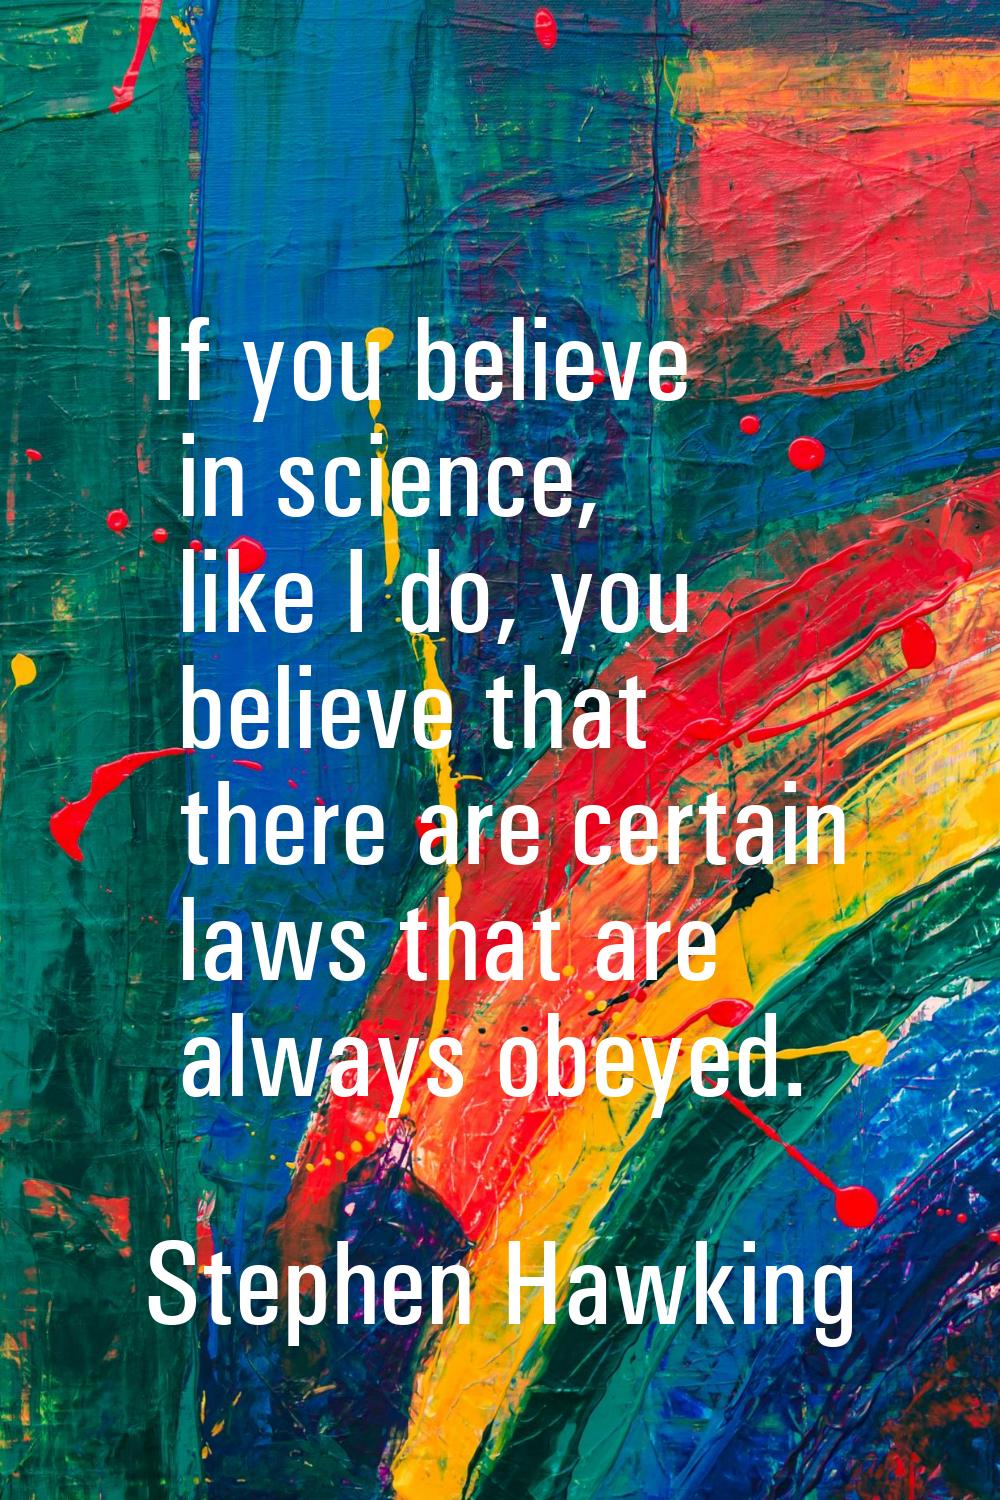 If you believe in science, like I do, you believe that there are certain laws that are always obeye